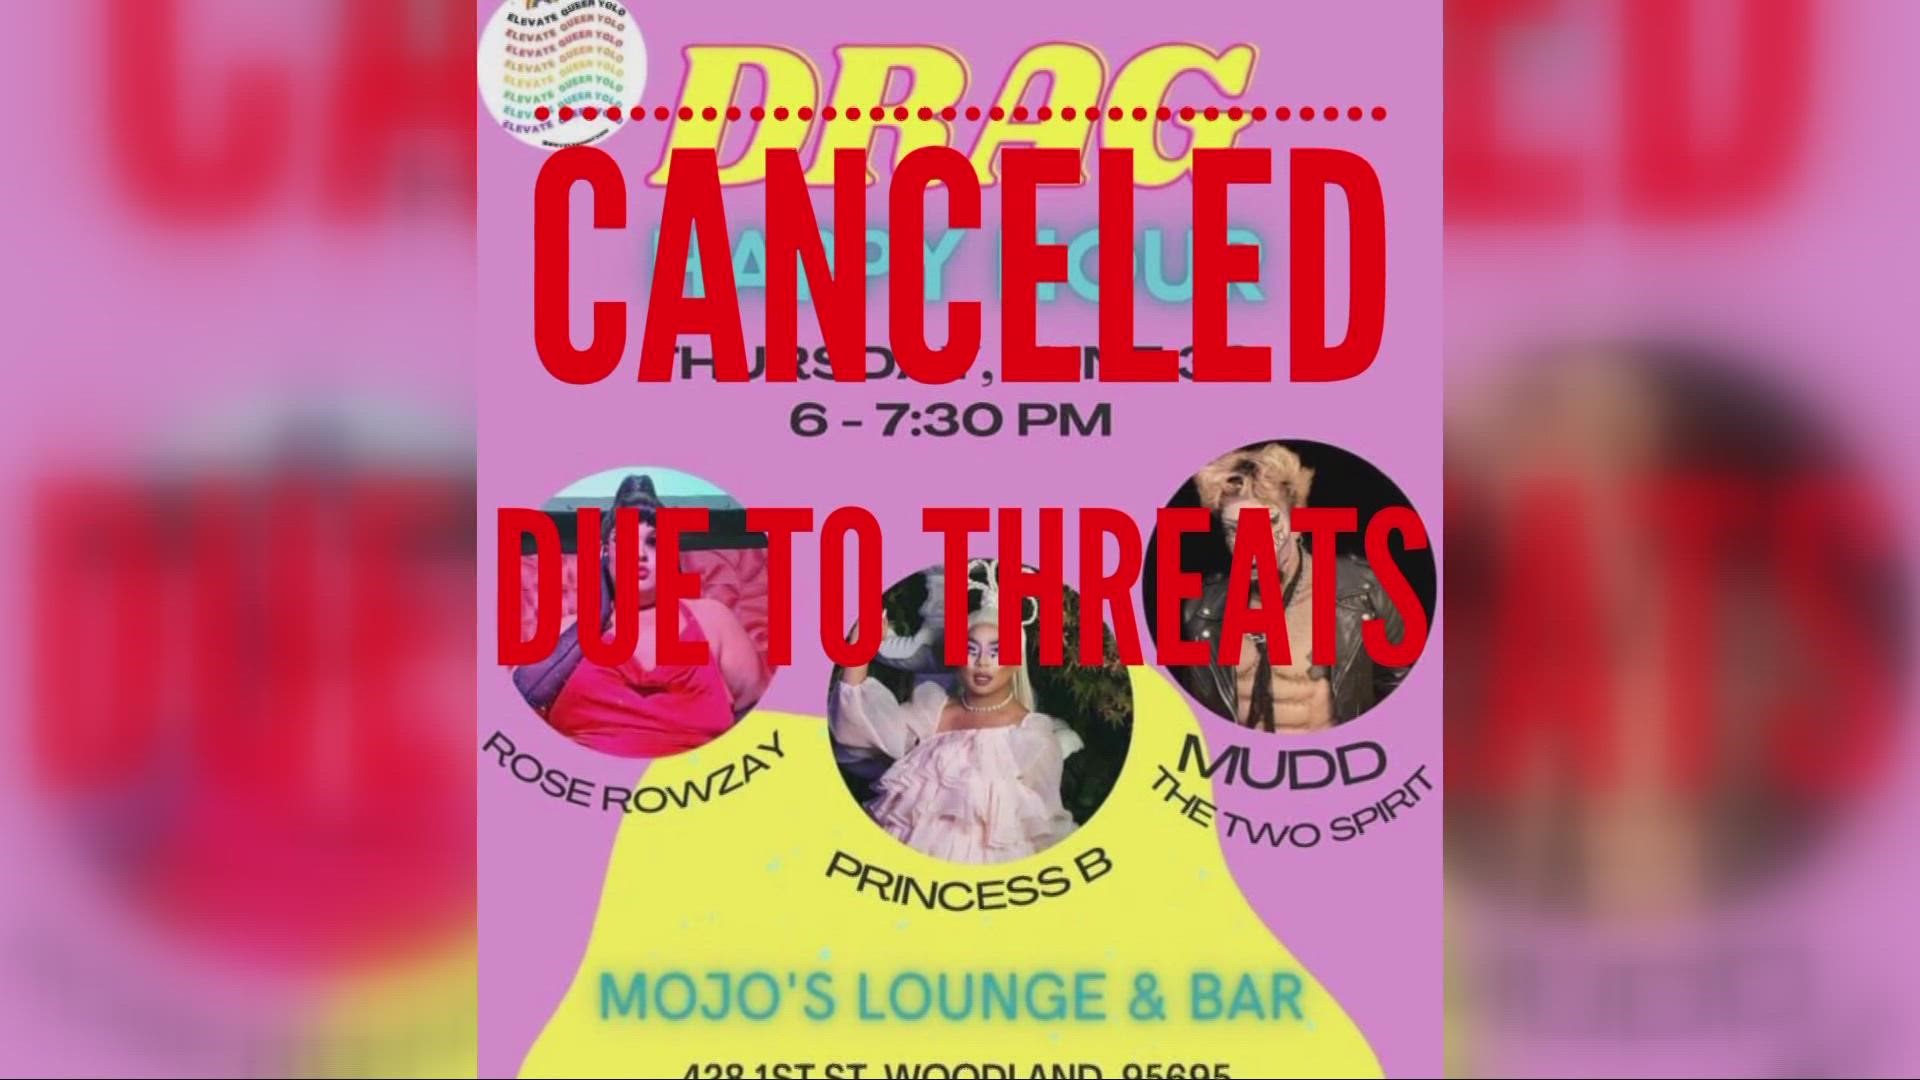 The Woodland Police Department says it is investigating the incident of anti-LGBTQ protesters crashing Mojo's Lounge & Bar, and they have help from the FBI.